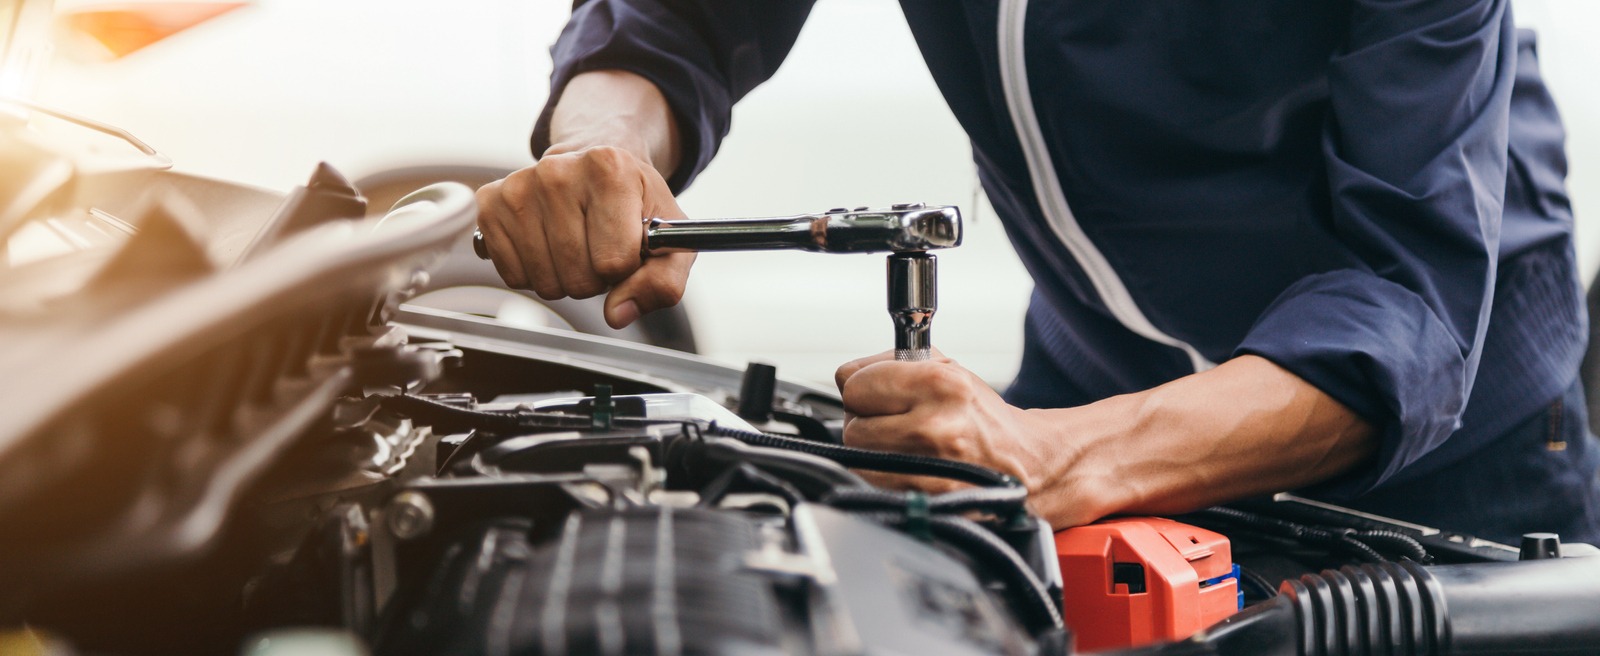 7 Car Maintenance Tips To Extend The Life Of Your Car